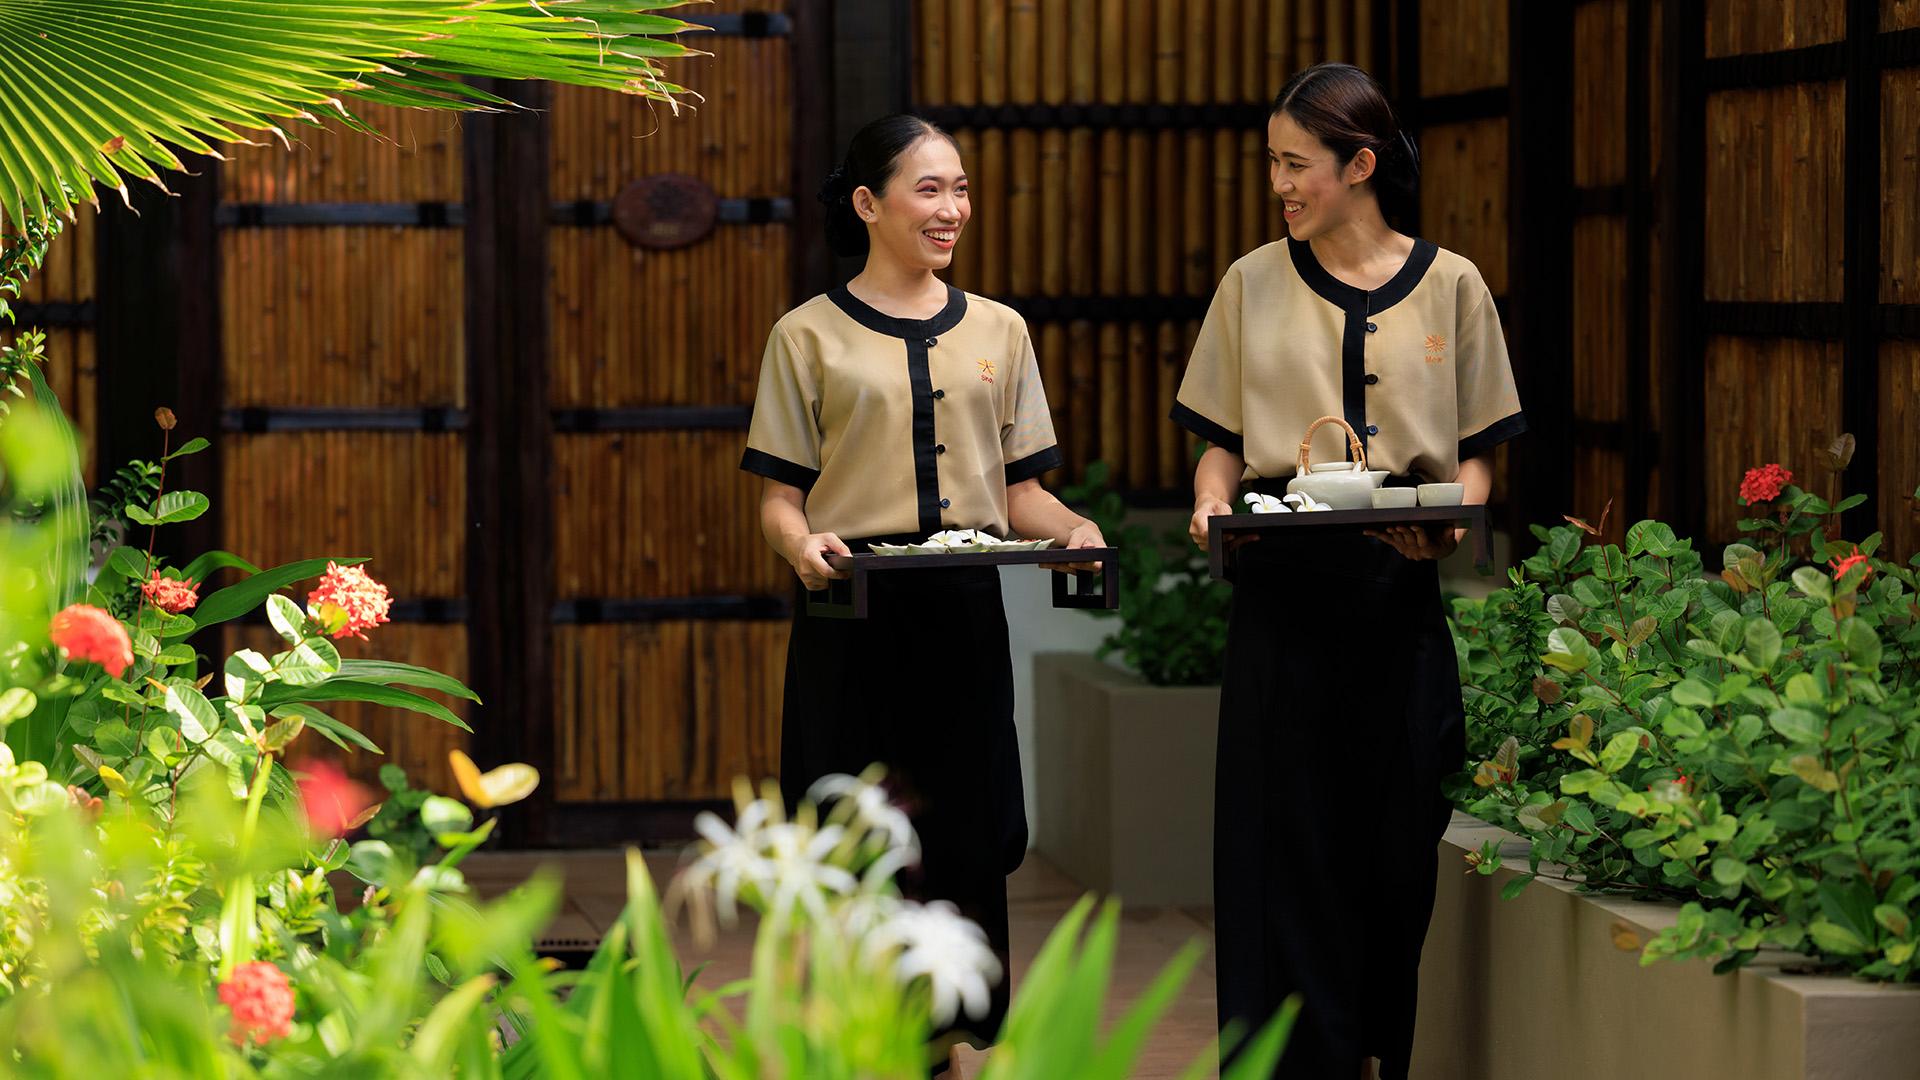 Two Angsana Spa therapists walking side-by-side, ready to pamper guests.